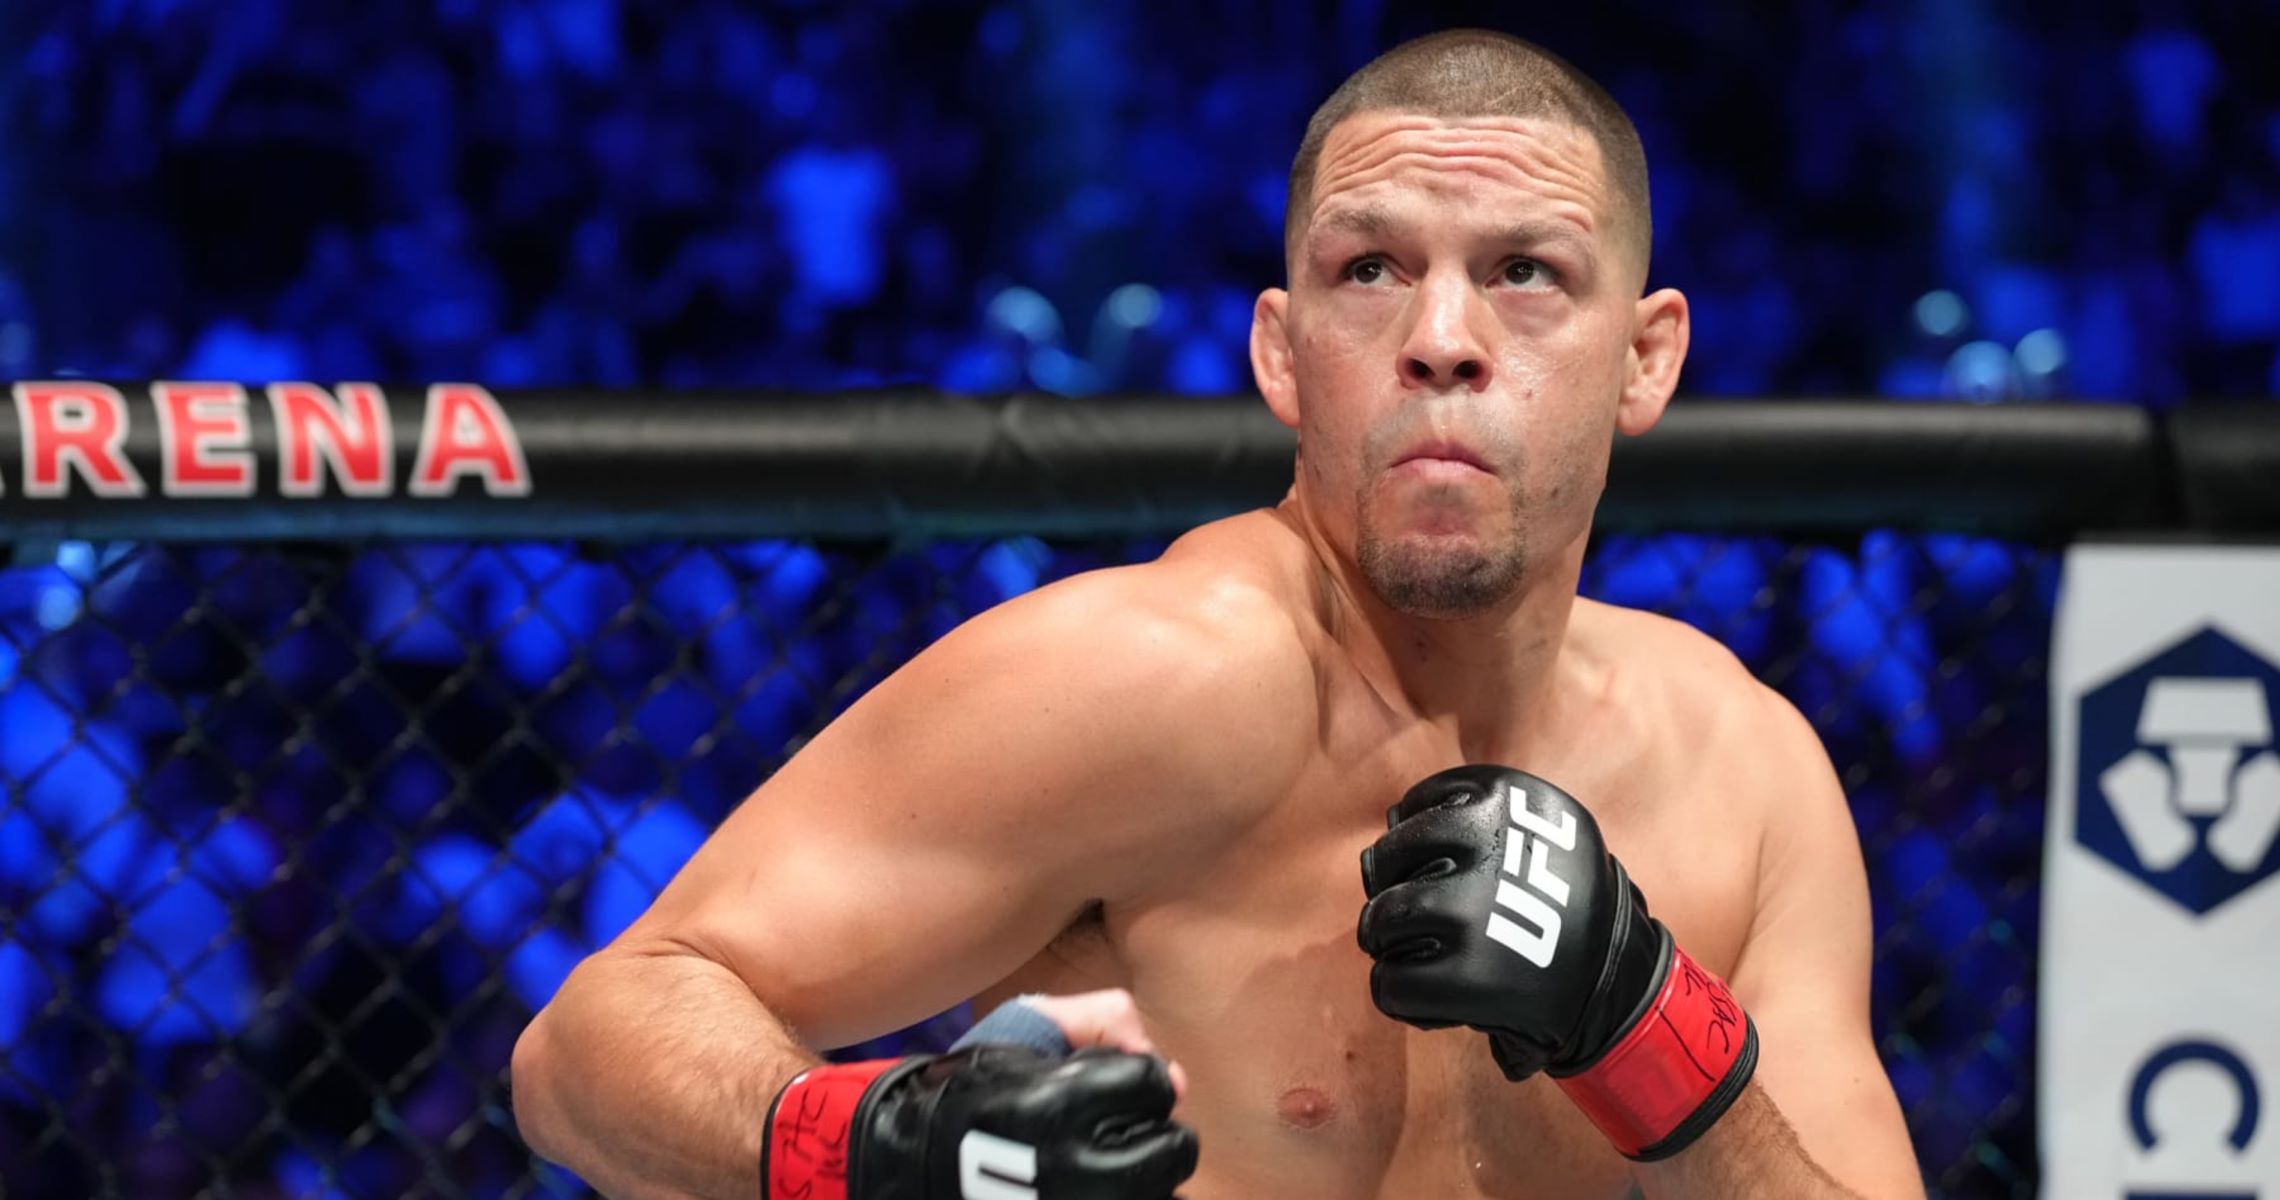 nate-diaz-new-orleans-street-fight-case-dropped-by-prosecutors-defending-himself-in-the-famous-altercation